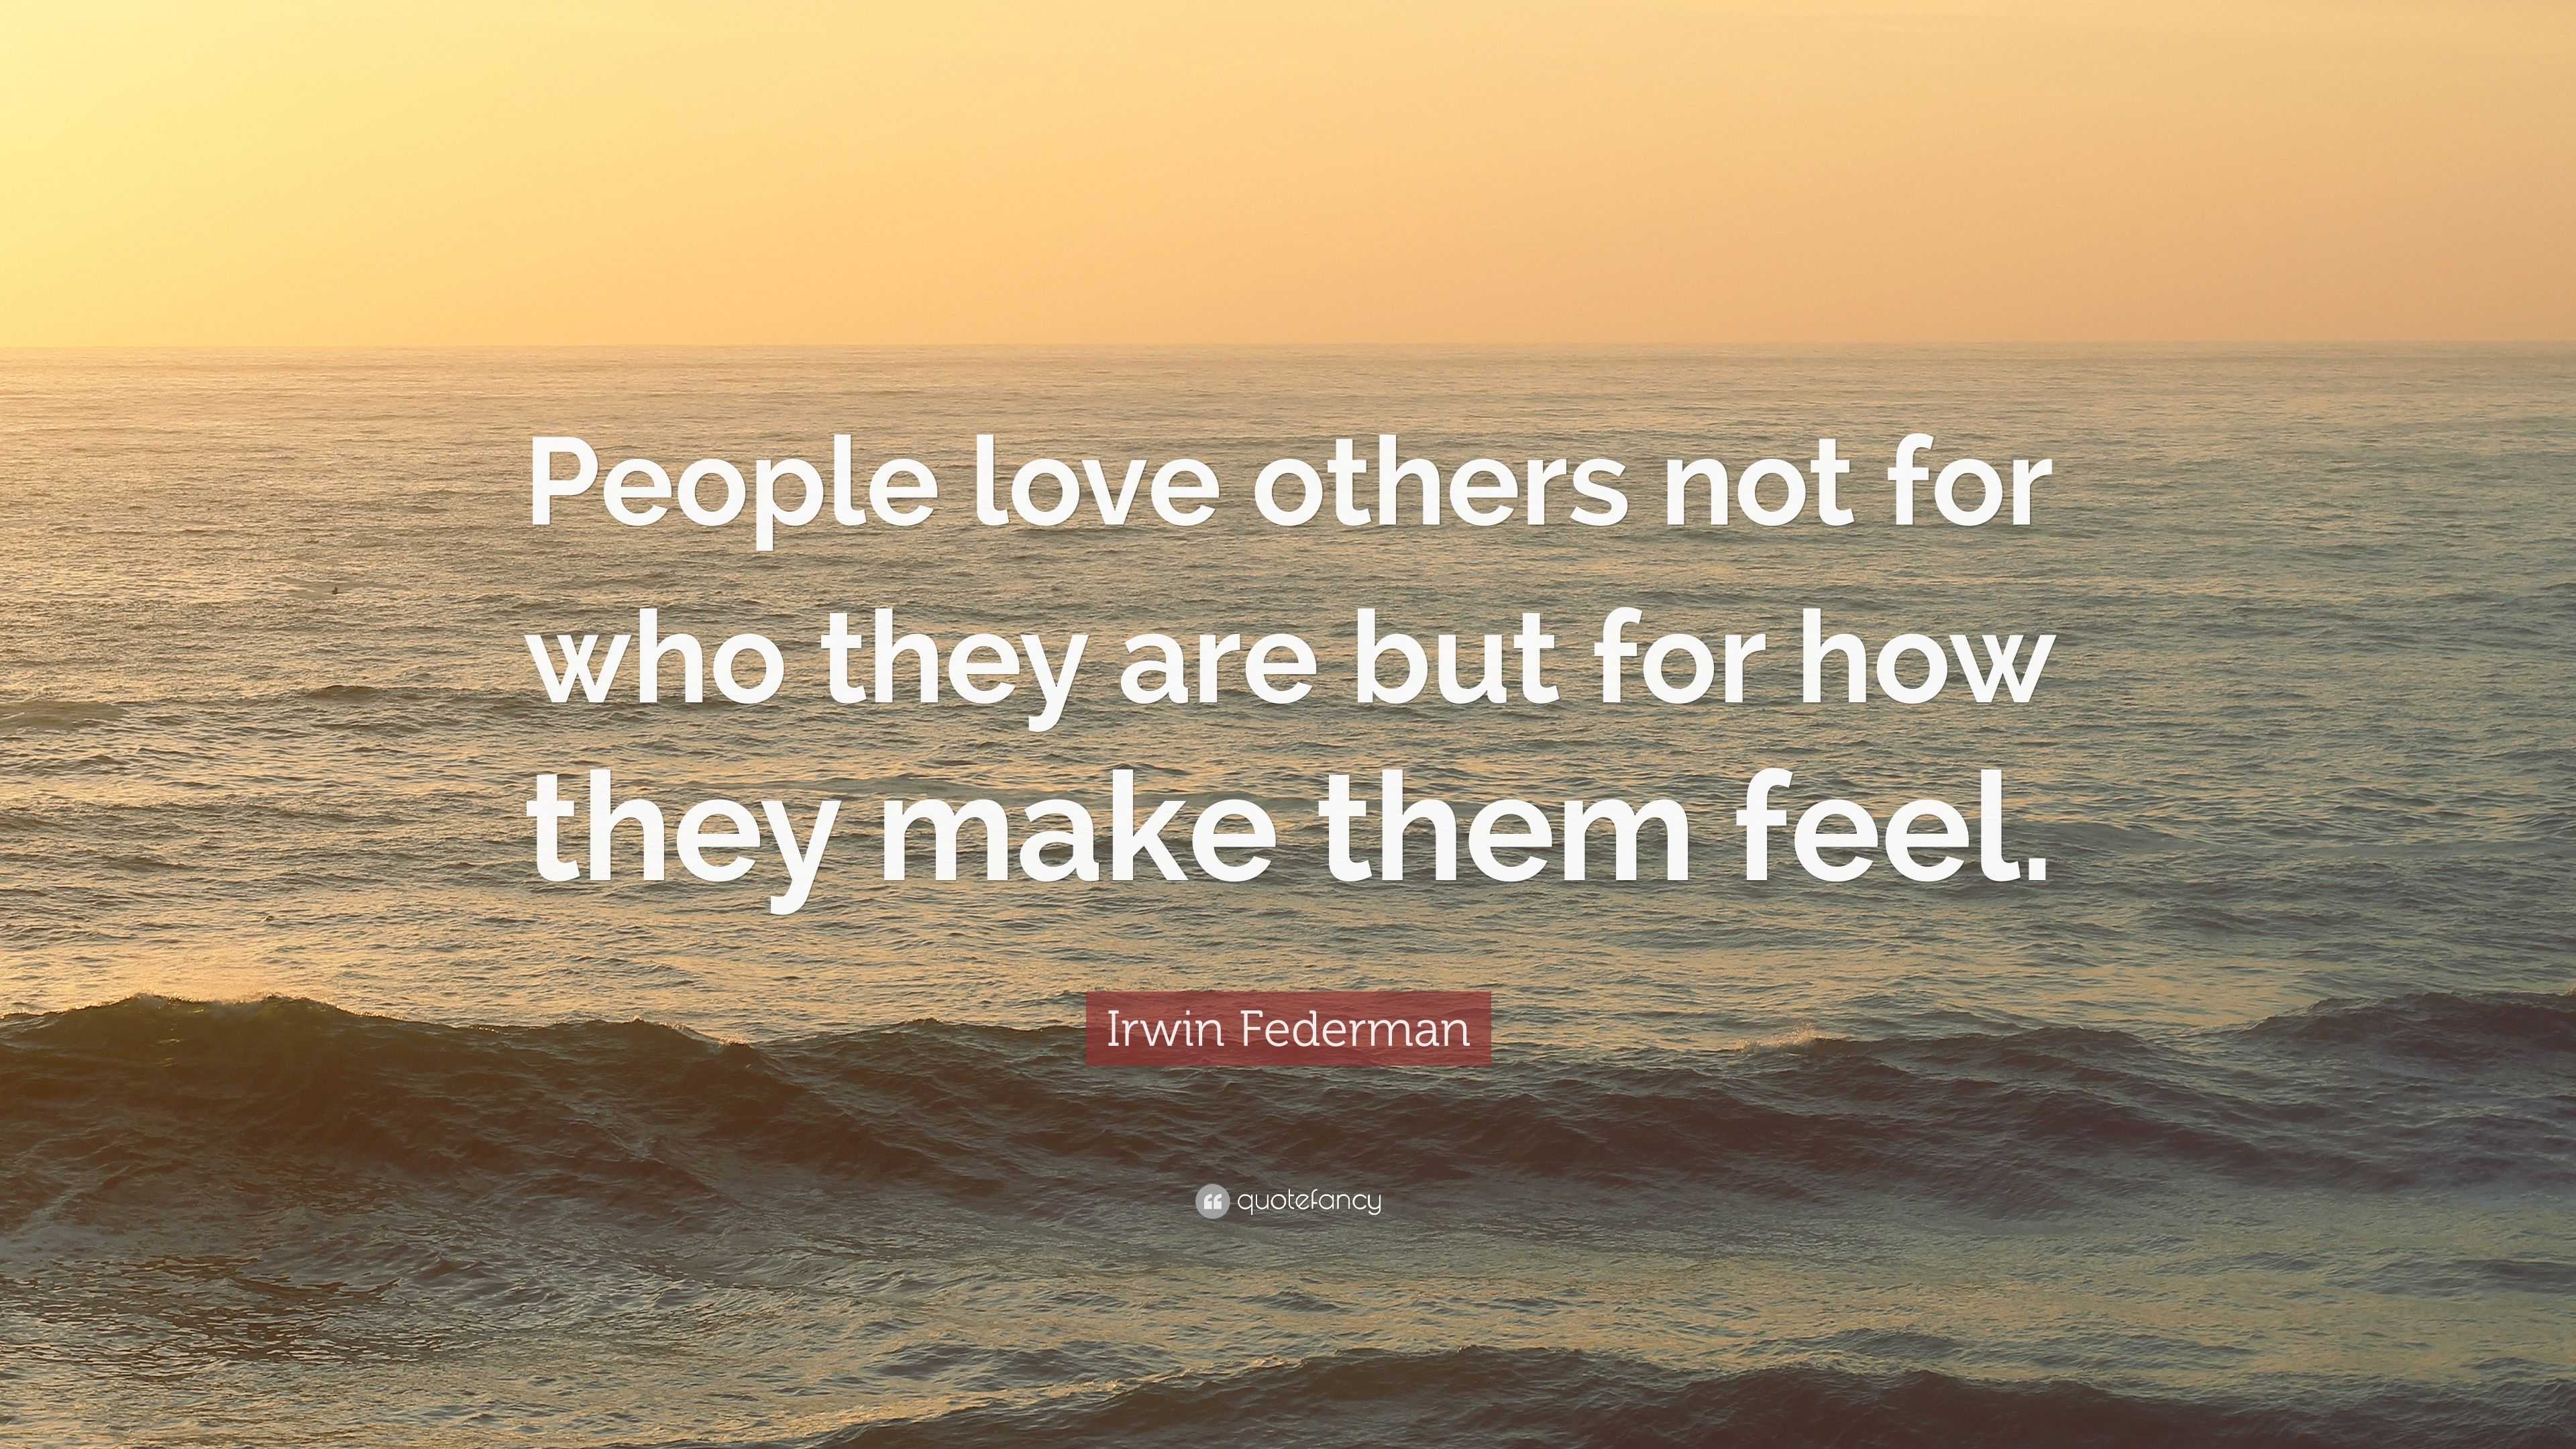 Irwin Federman Quote: “People love others not for who they are but for ...